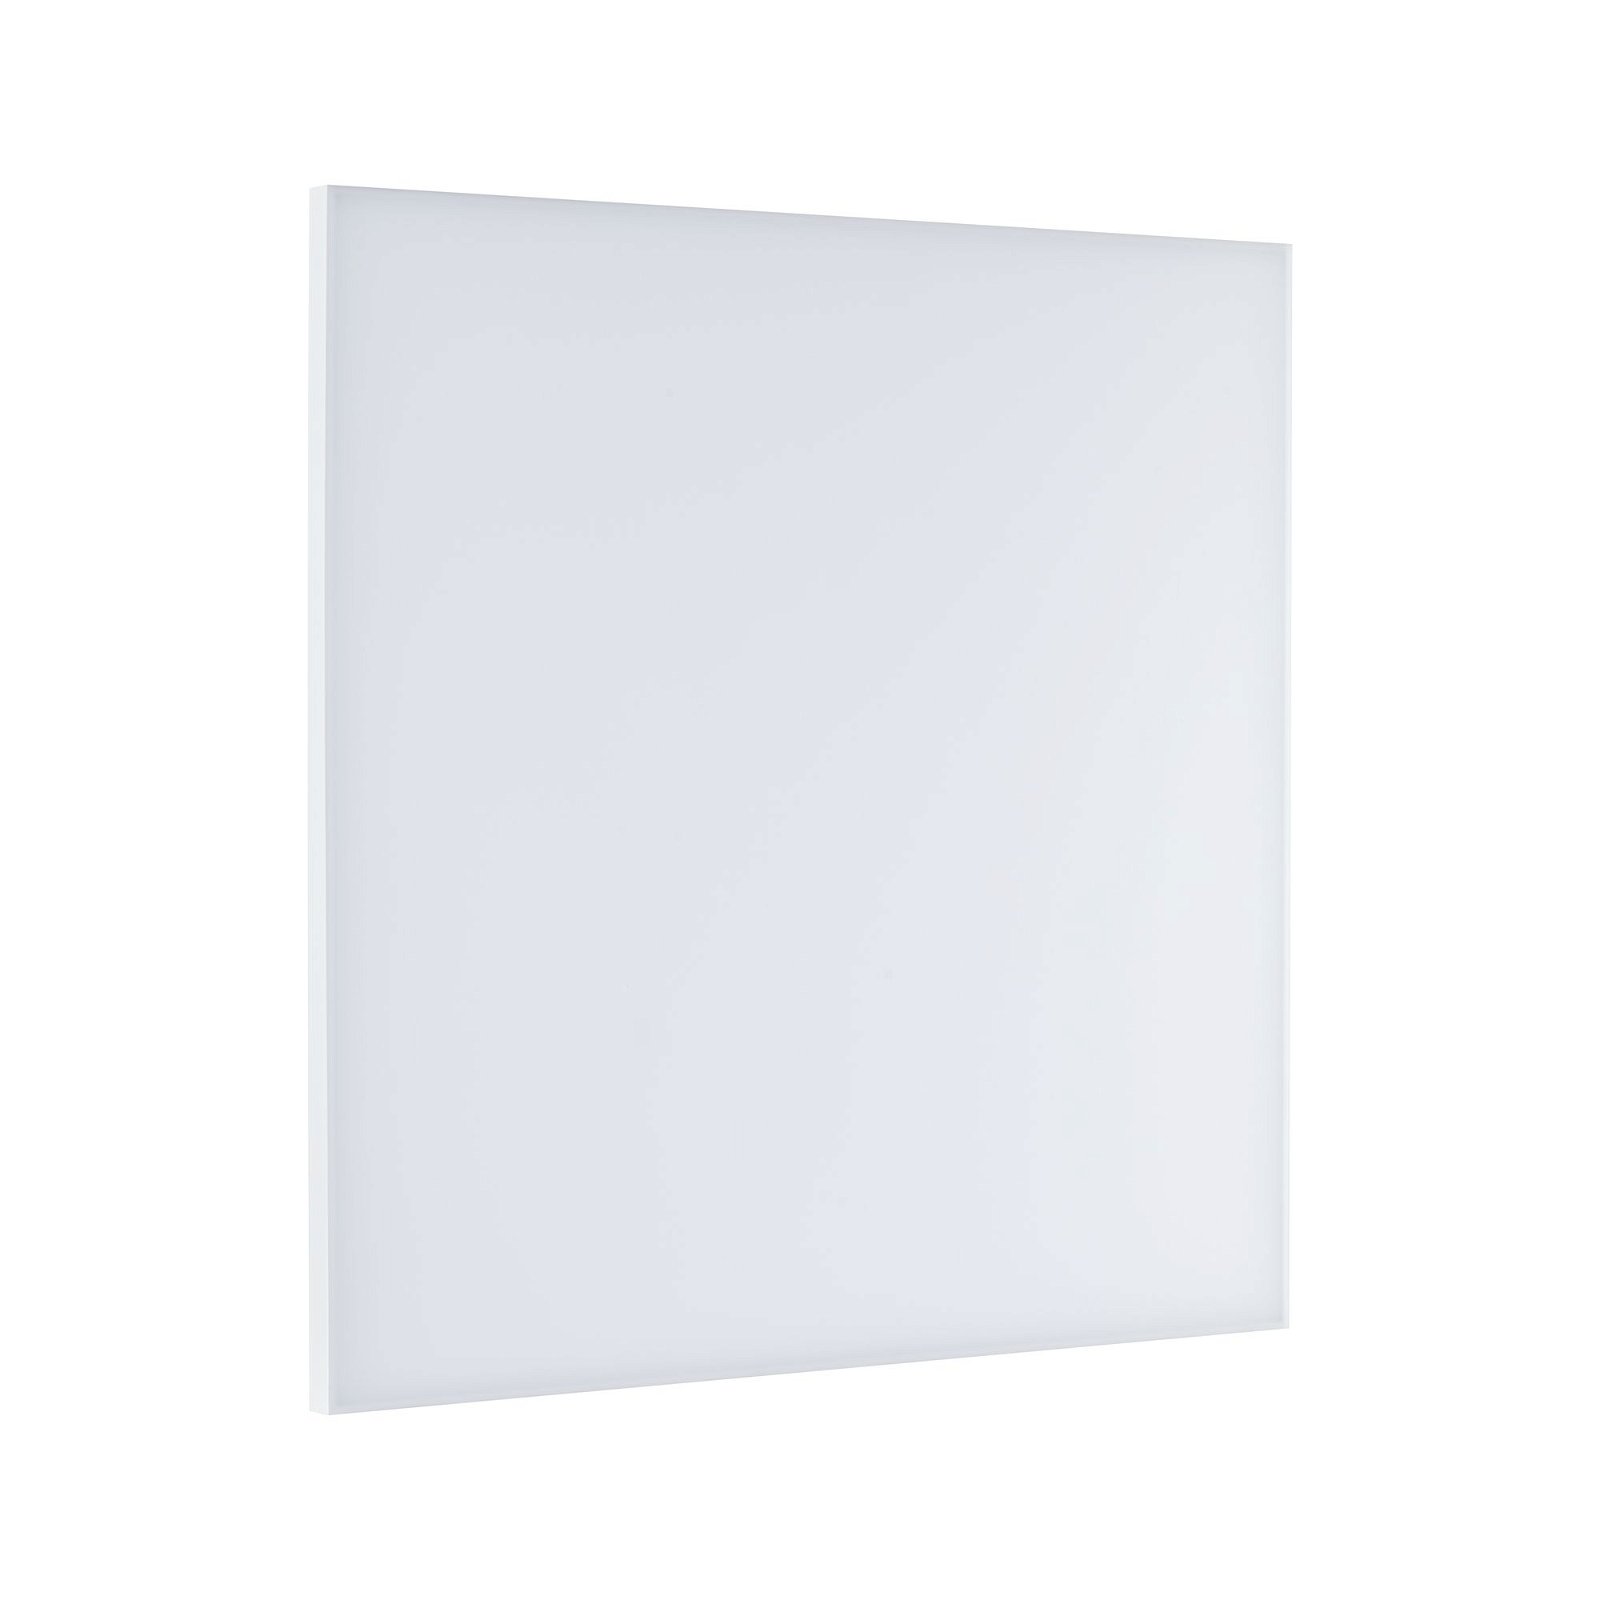 LED Panel Smart Home Zigbee Velora square 595x595mm 19,5W 2200lm Tunable White Matt white dimmable